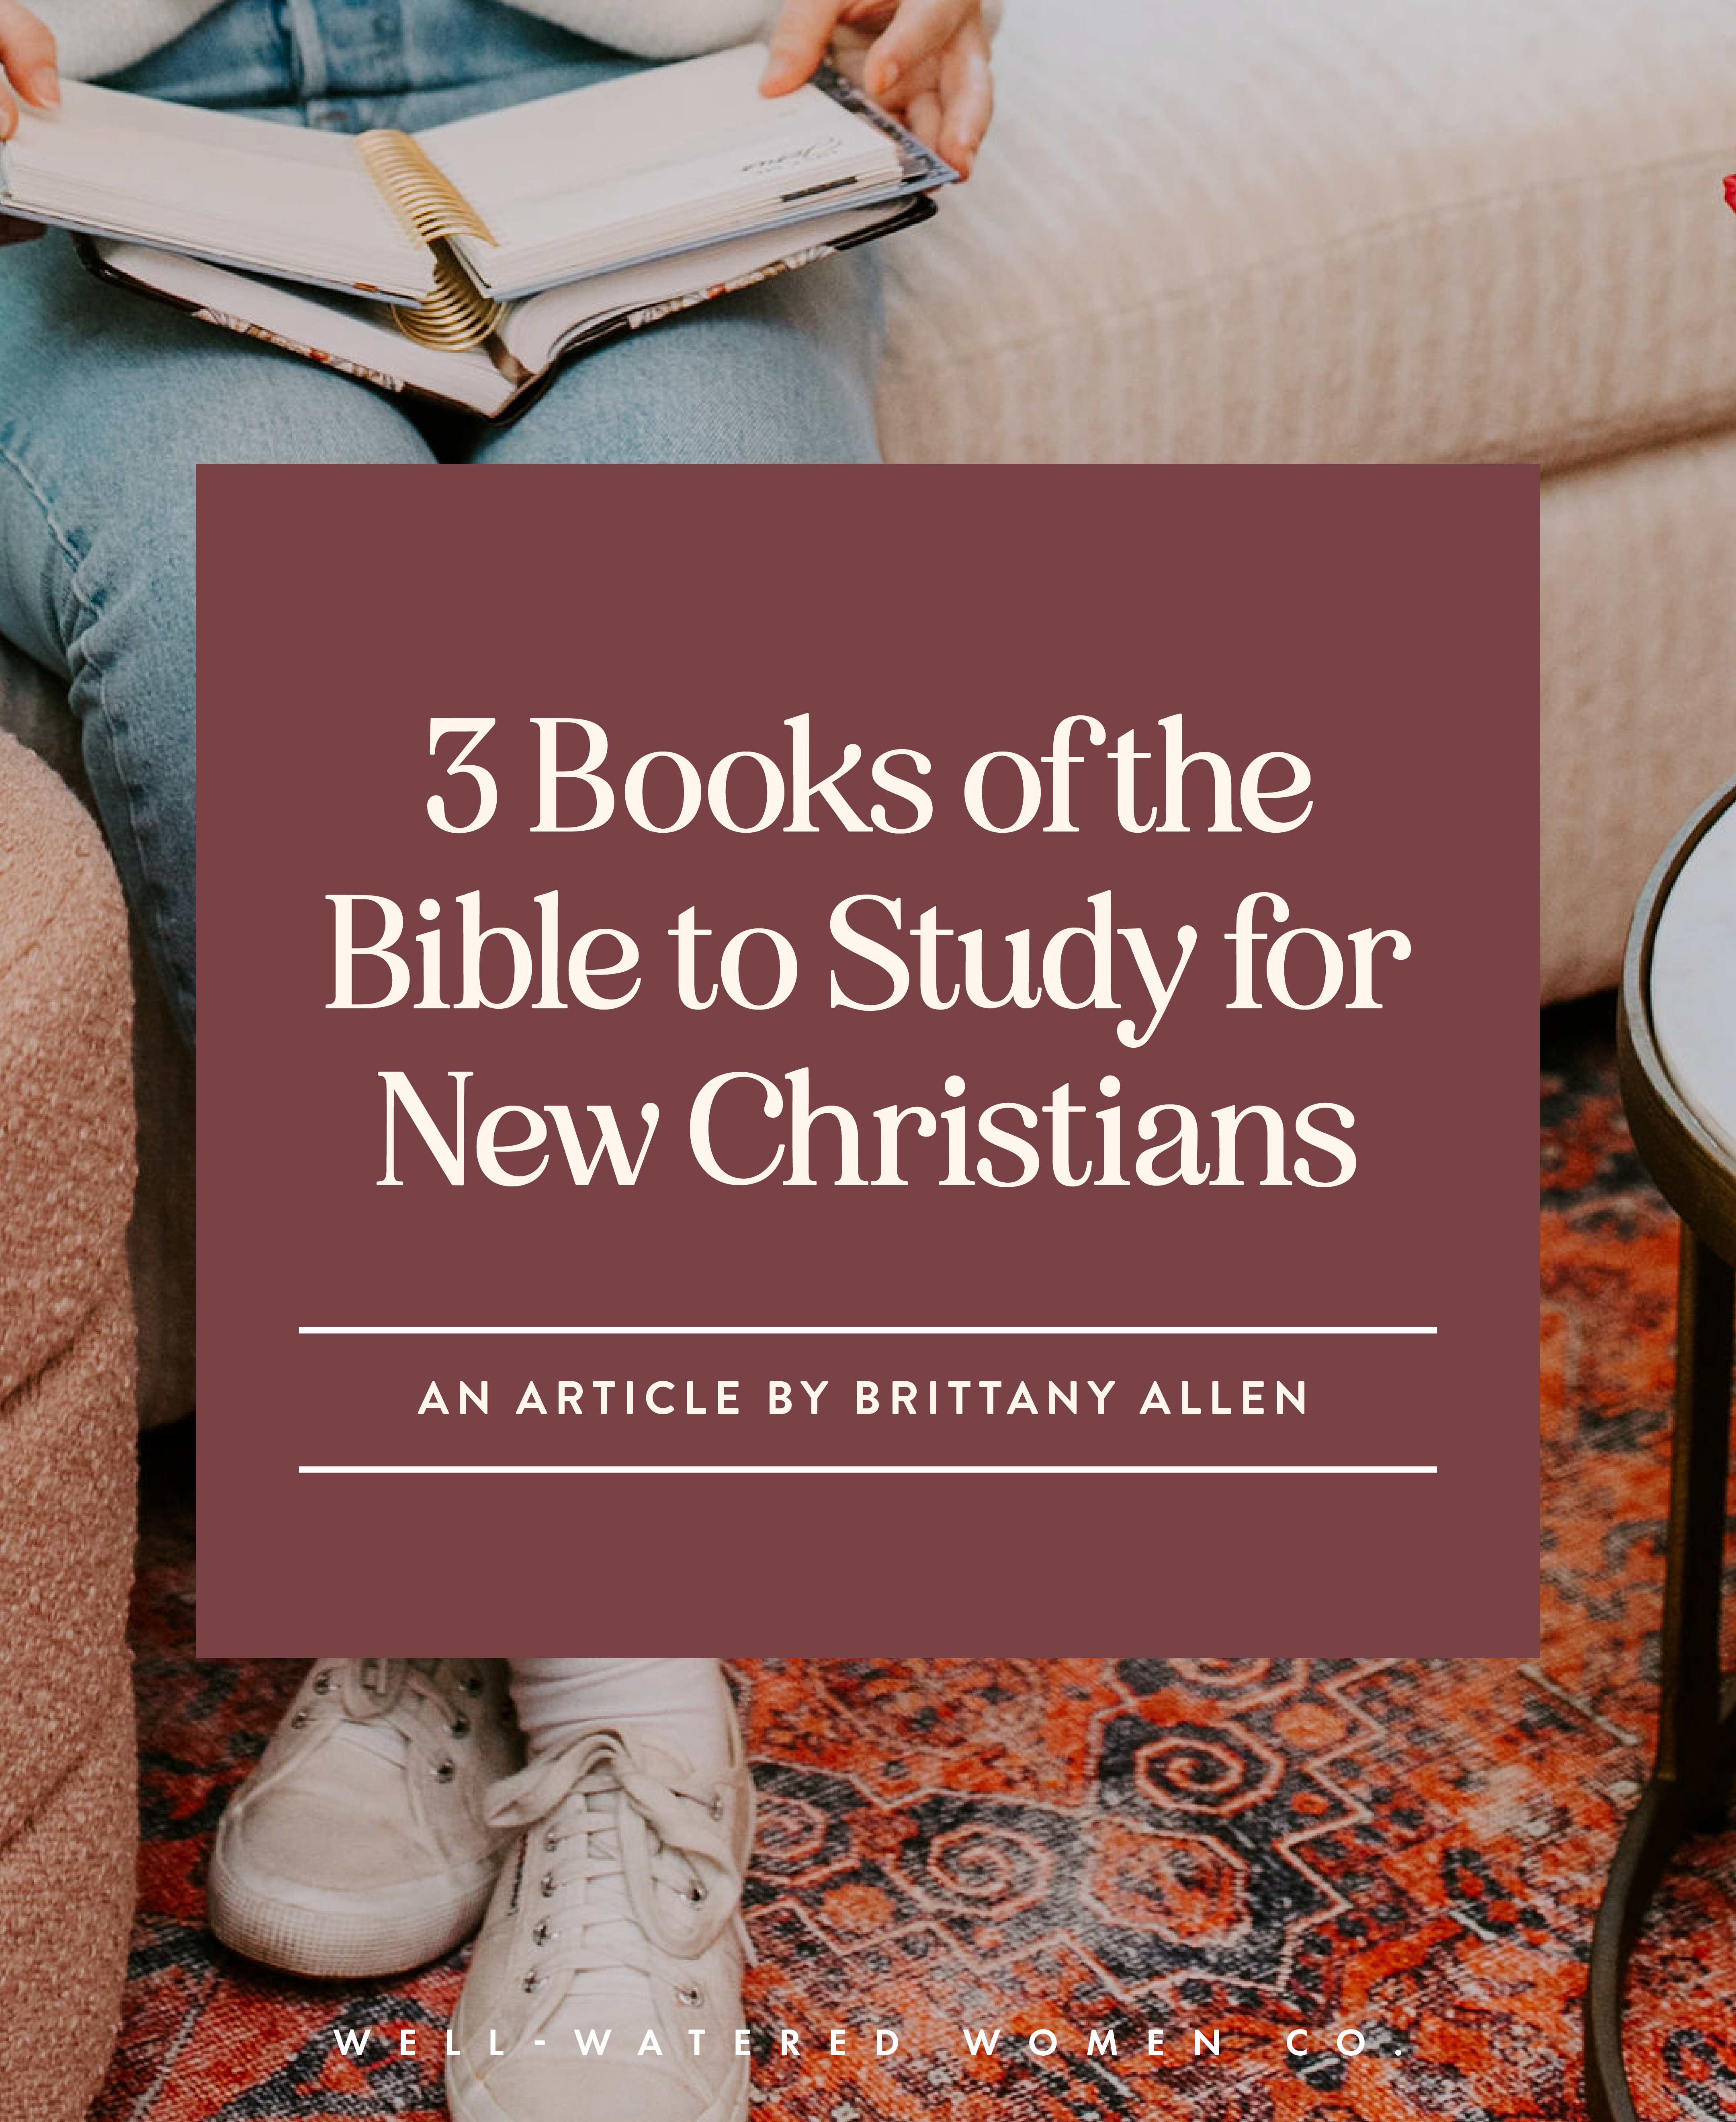 3 Books of the Bible to Study for New Christians - an article from Well-Watered Women